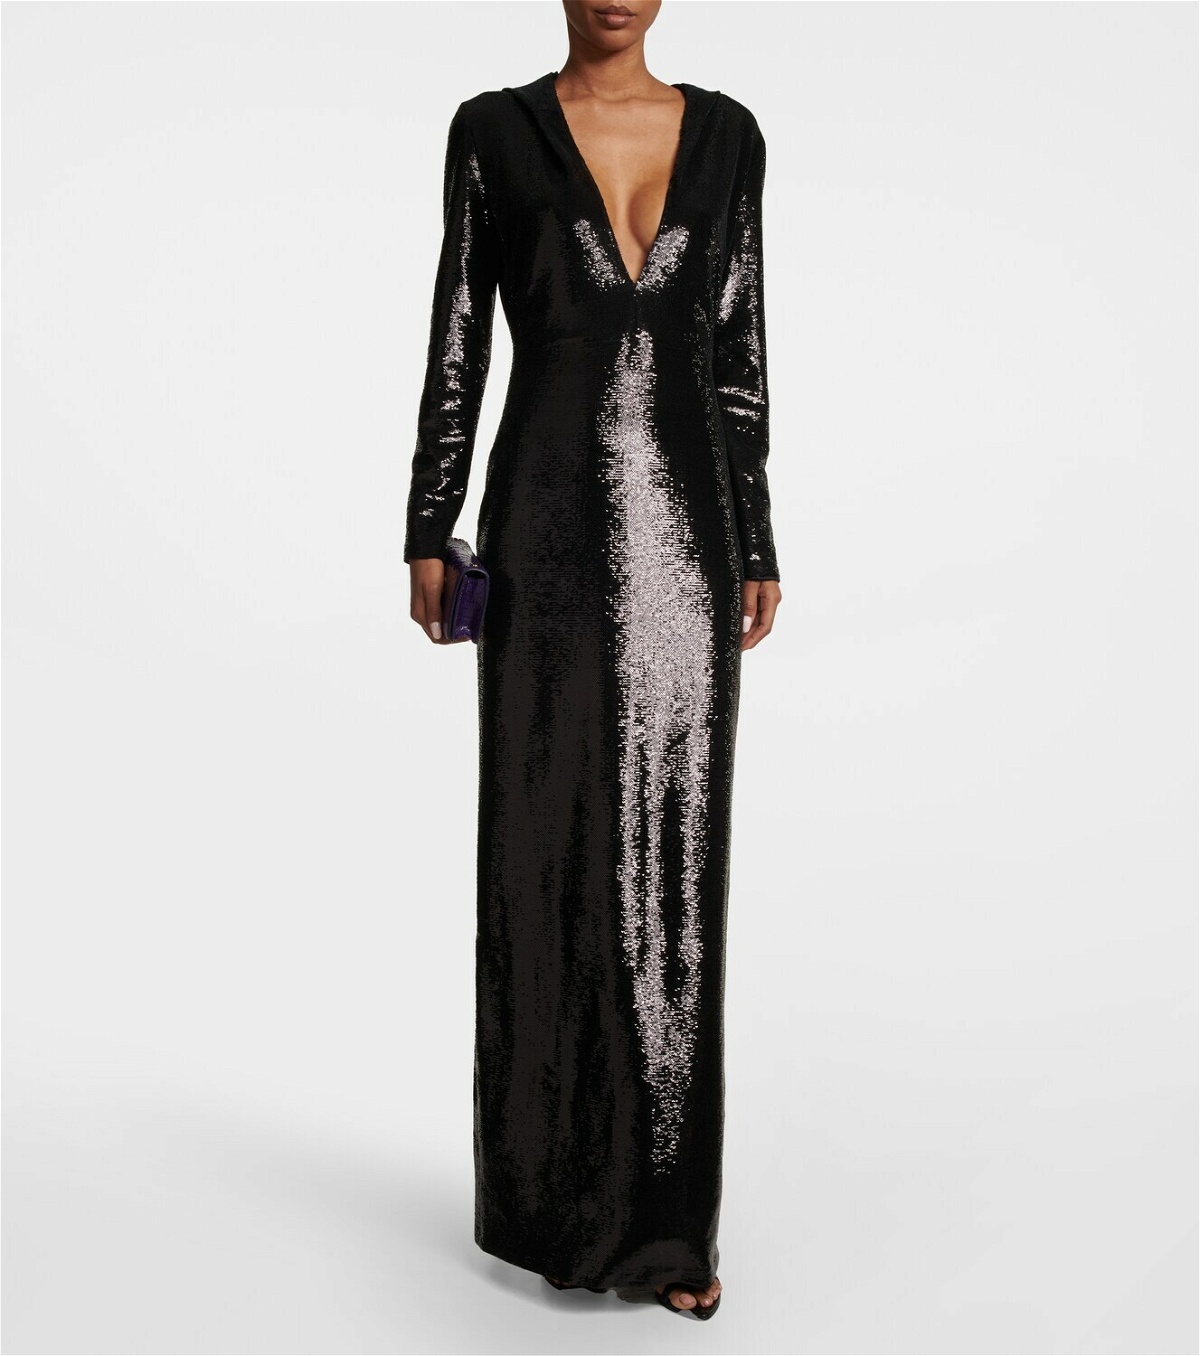 Tom Ford - Sequin-embellished hooded gown TOM FORD